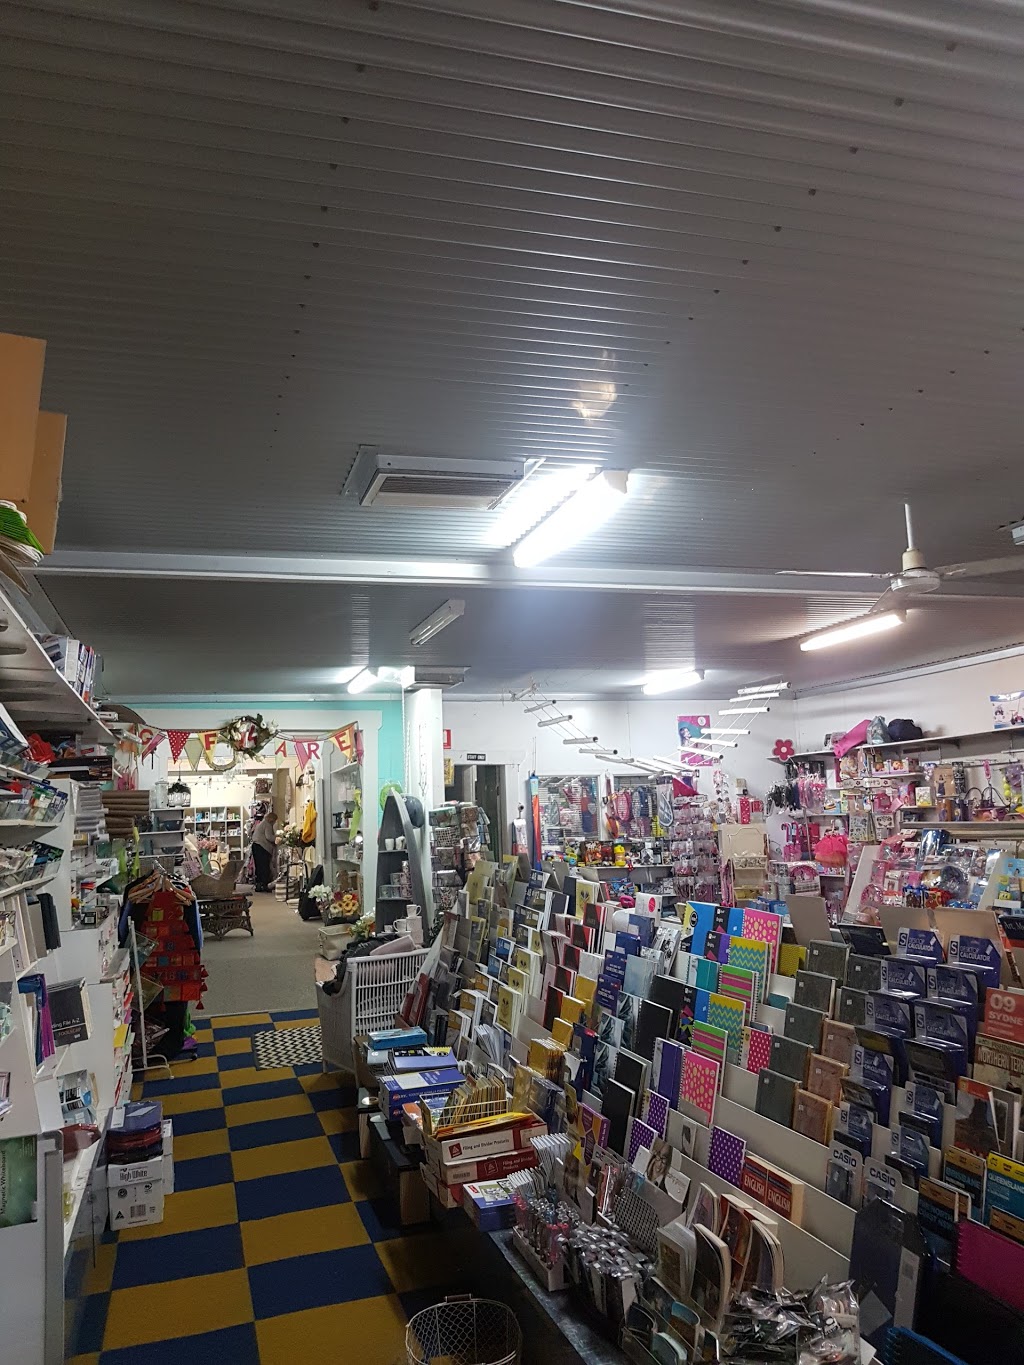 Wee Waa Newsagency and Gift Shop | book store | 80 Rose St, Wee Waa NSW 2388, Australia | 0267954154 OR +61 2 6795 4154